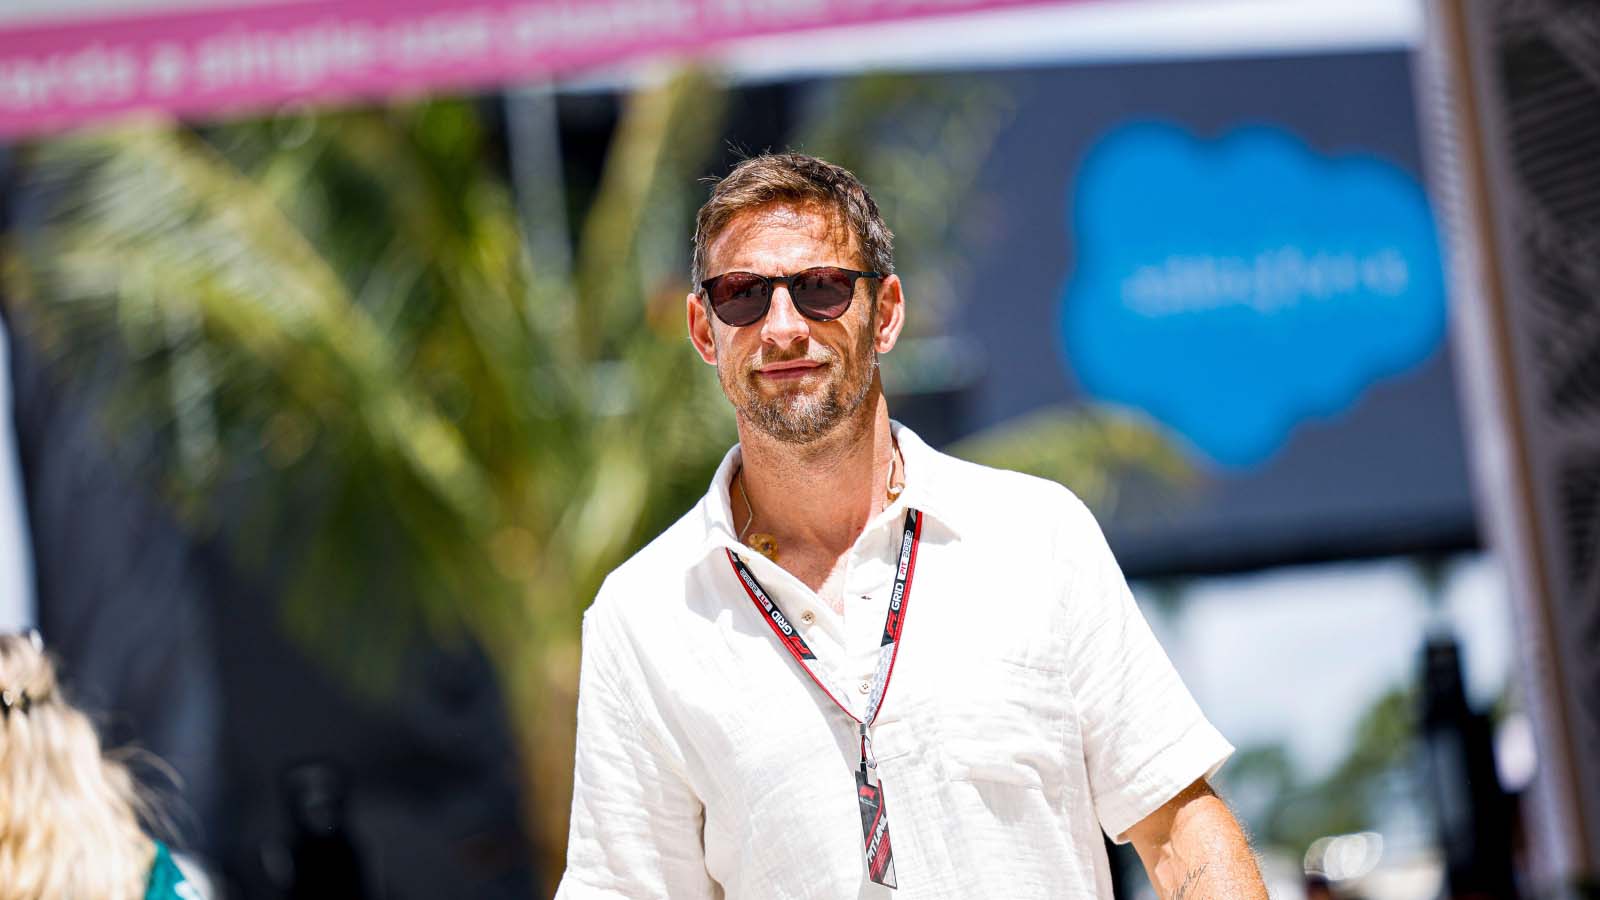 Jenson Button in the paddock. Miami May 2022.